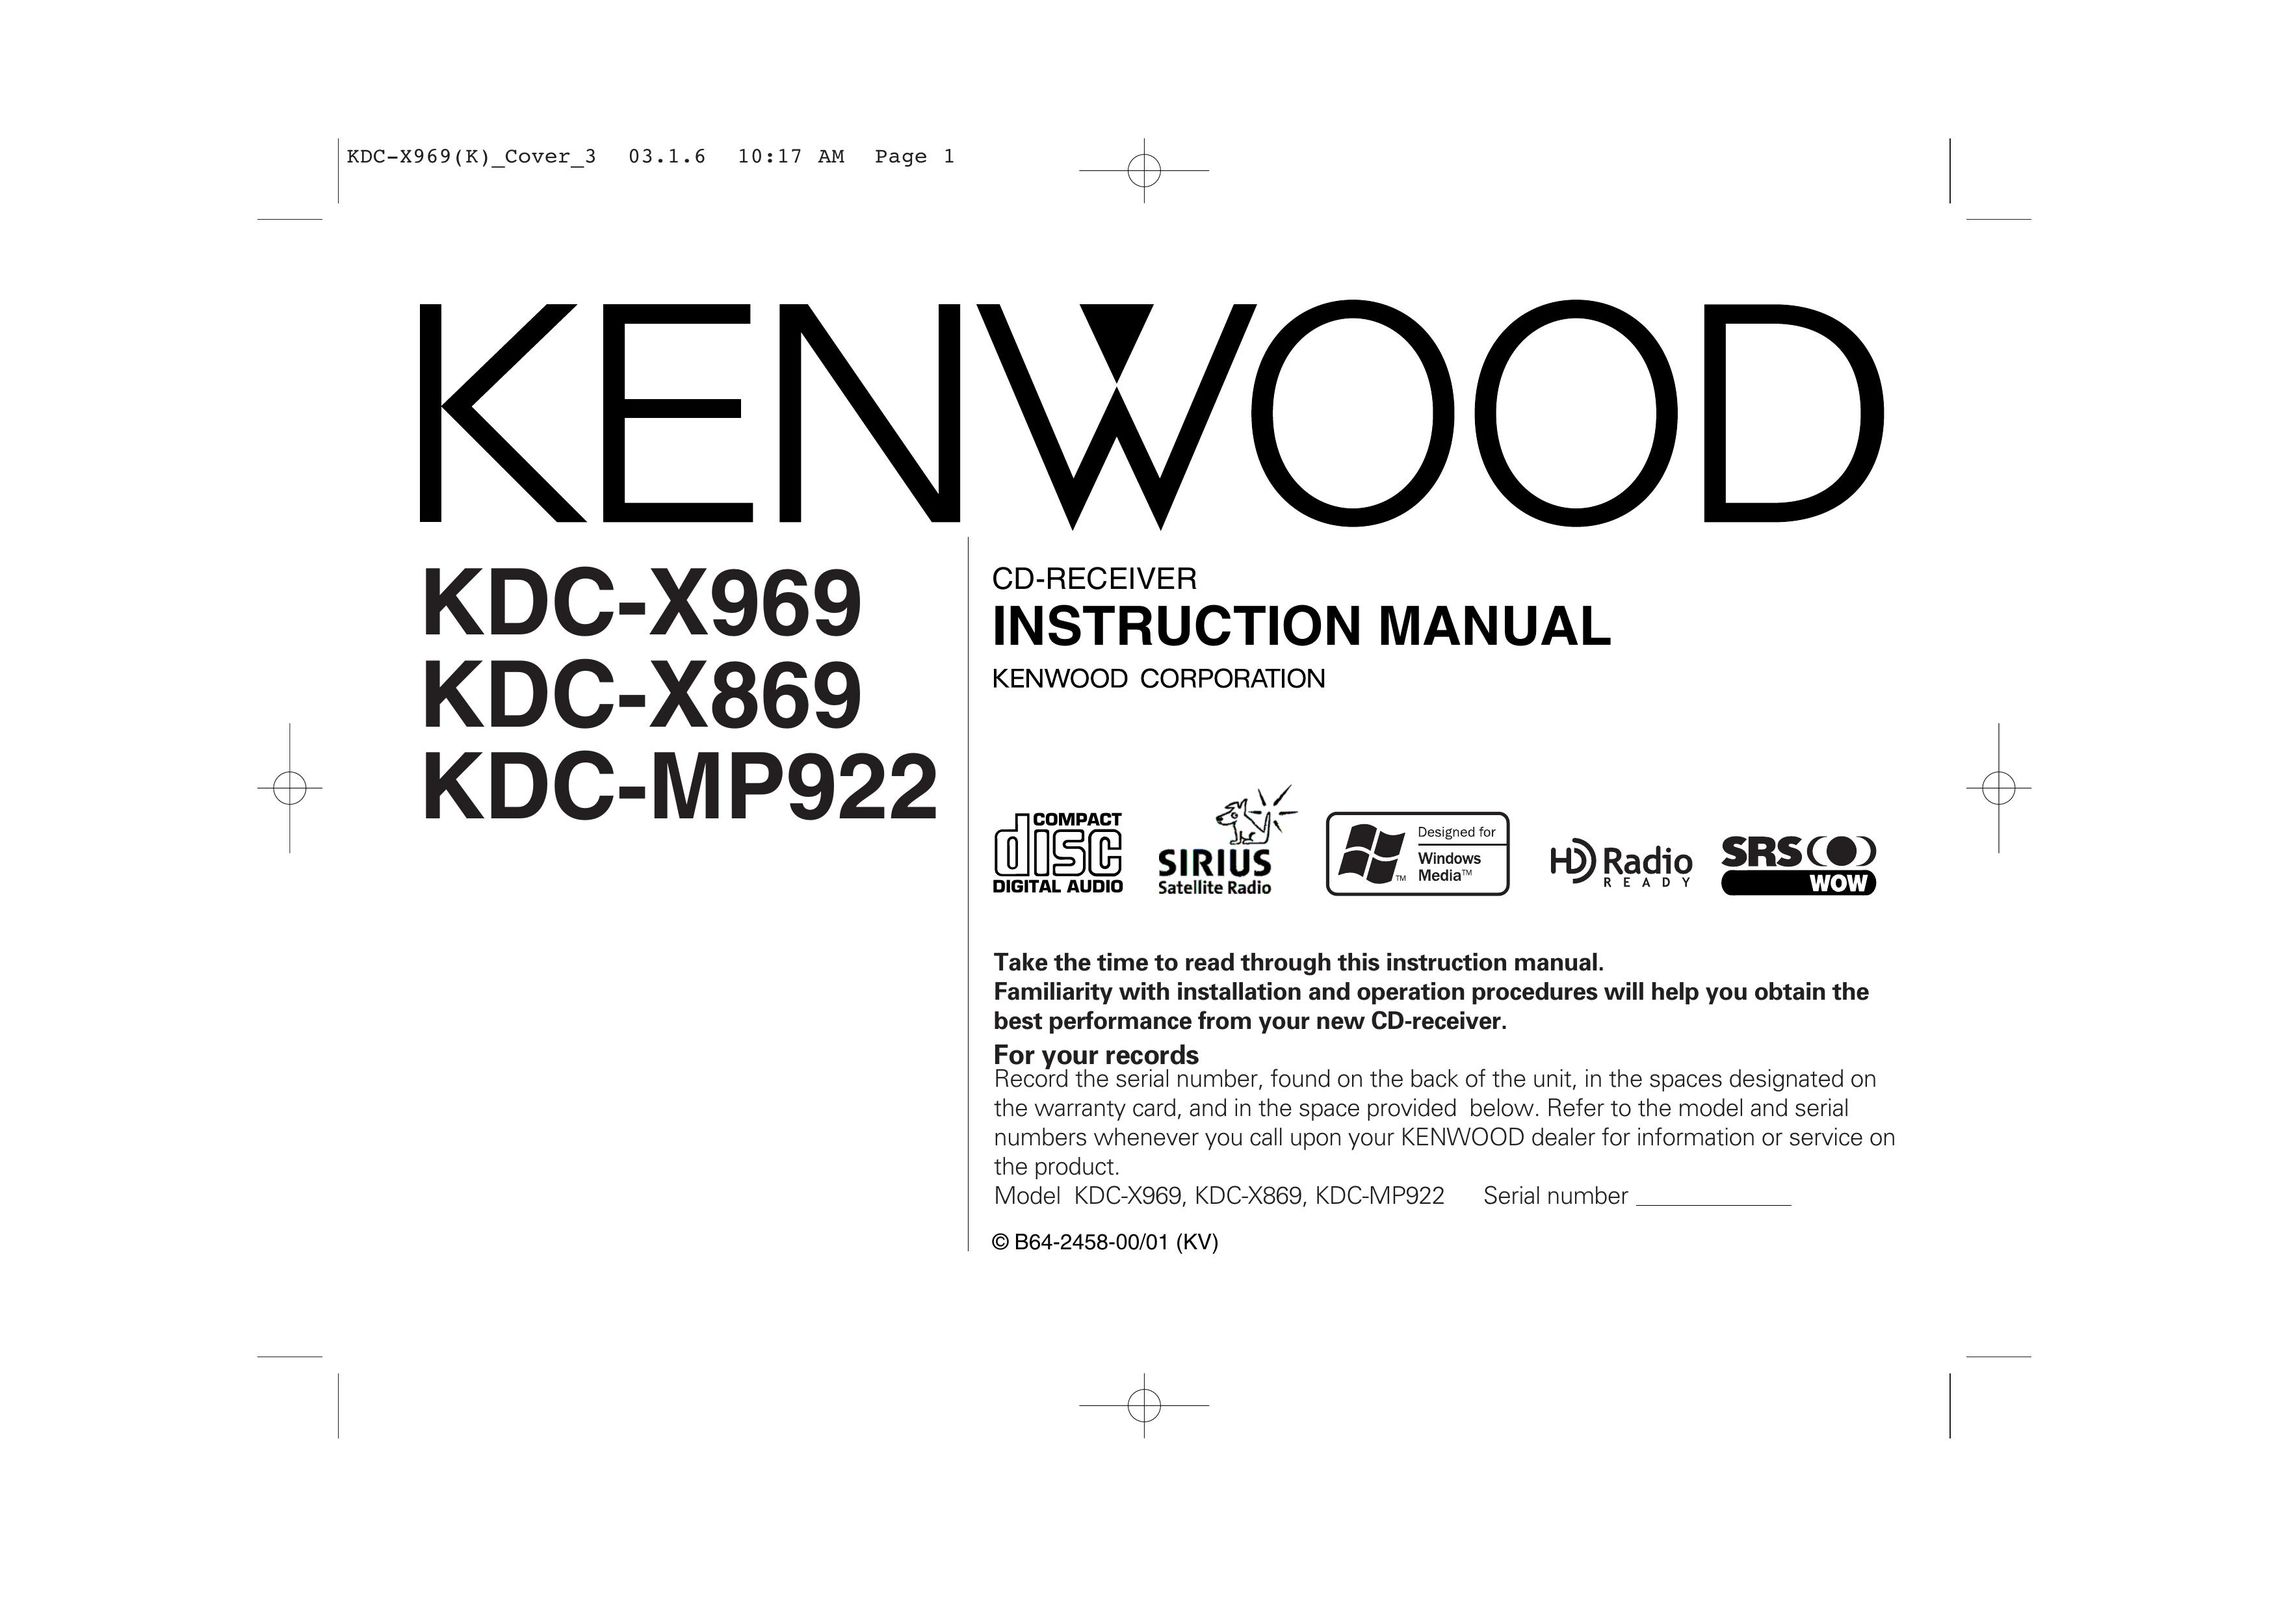 Kenwood KDC-MP922 Stereo Receiver User Manual